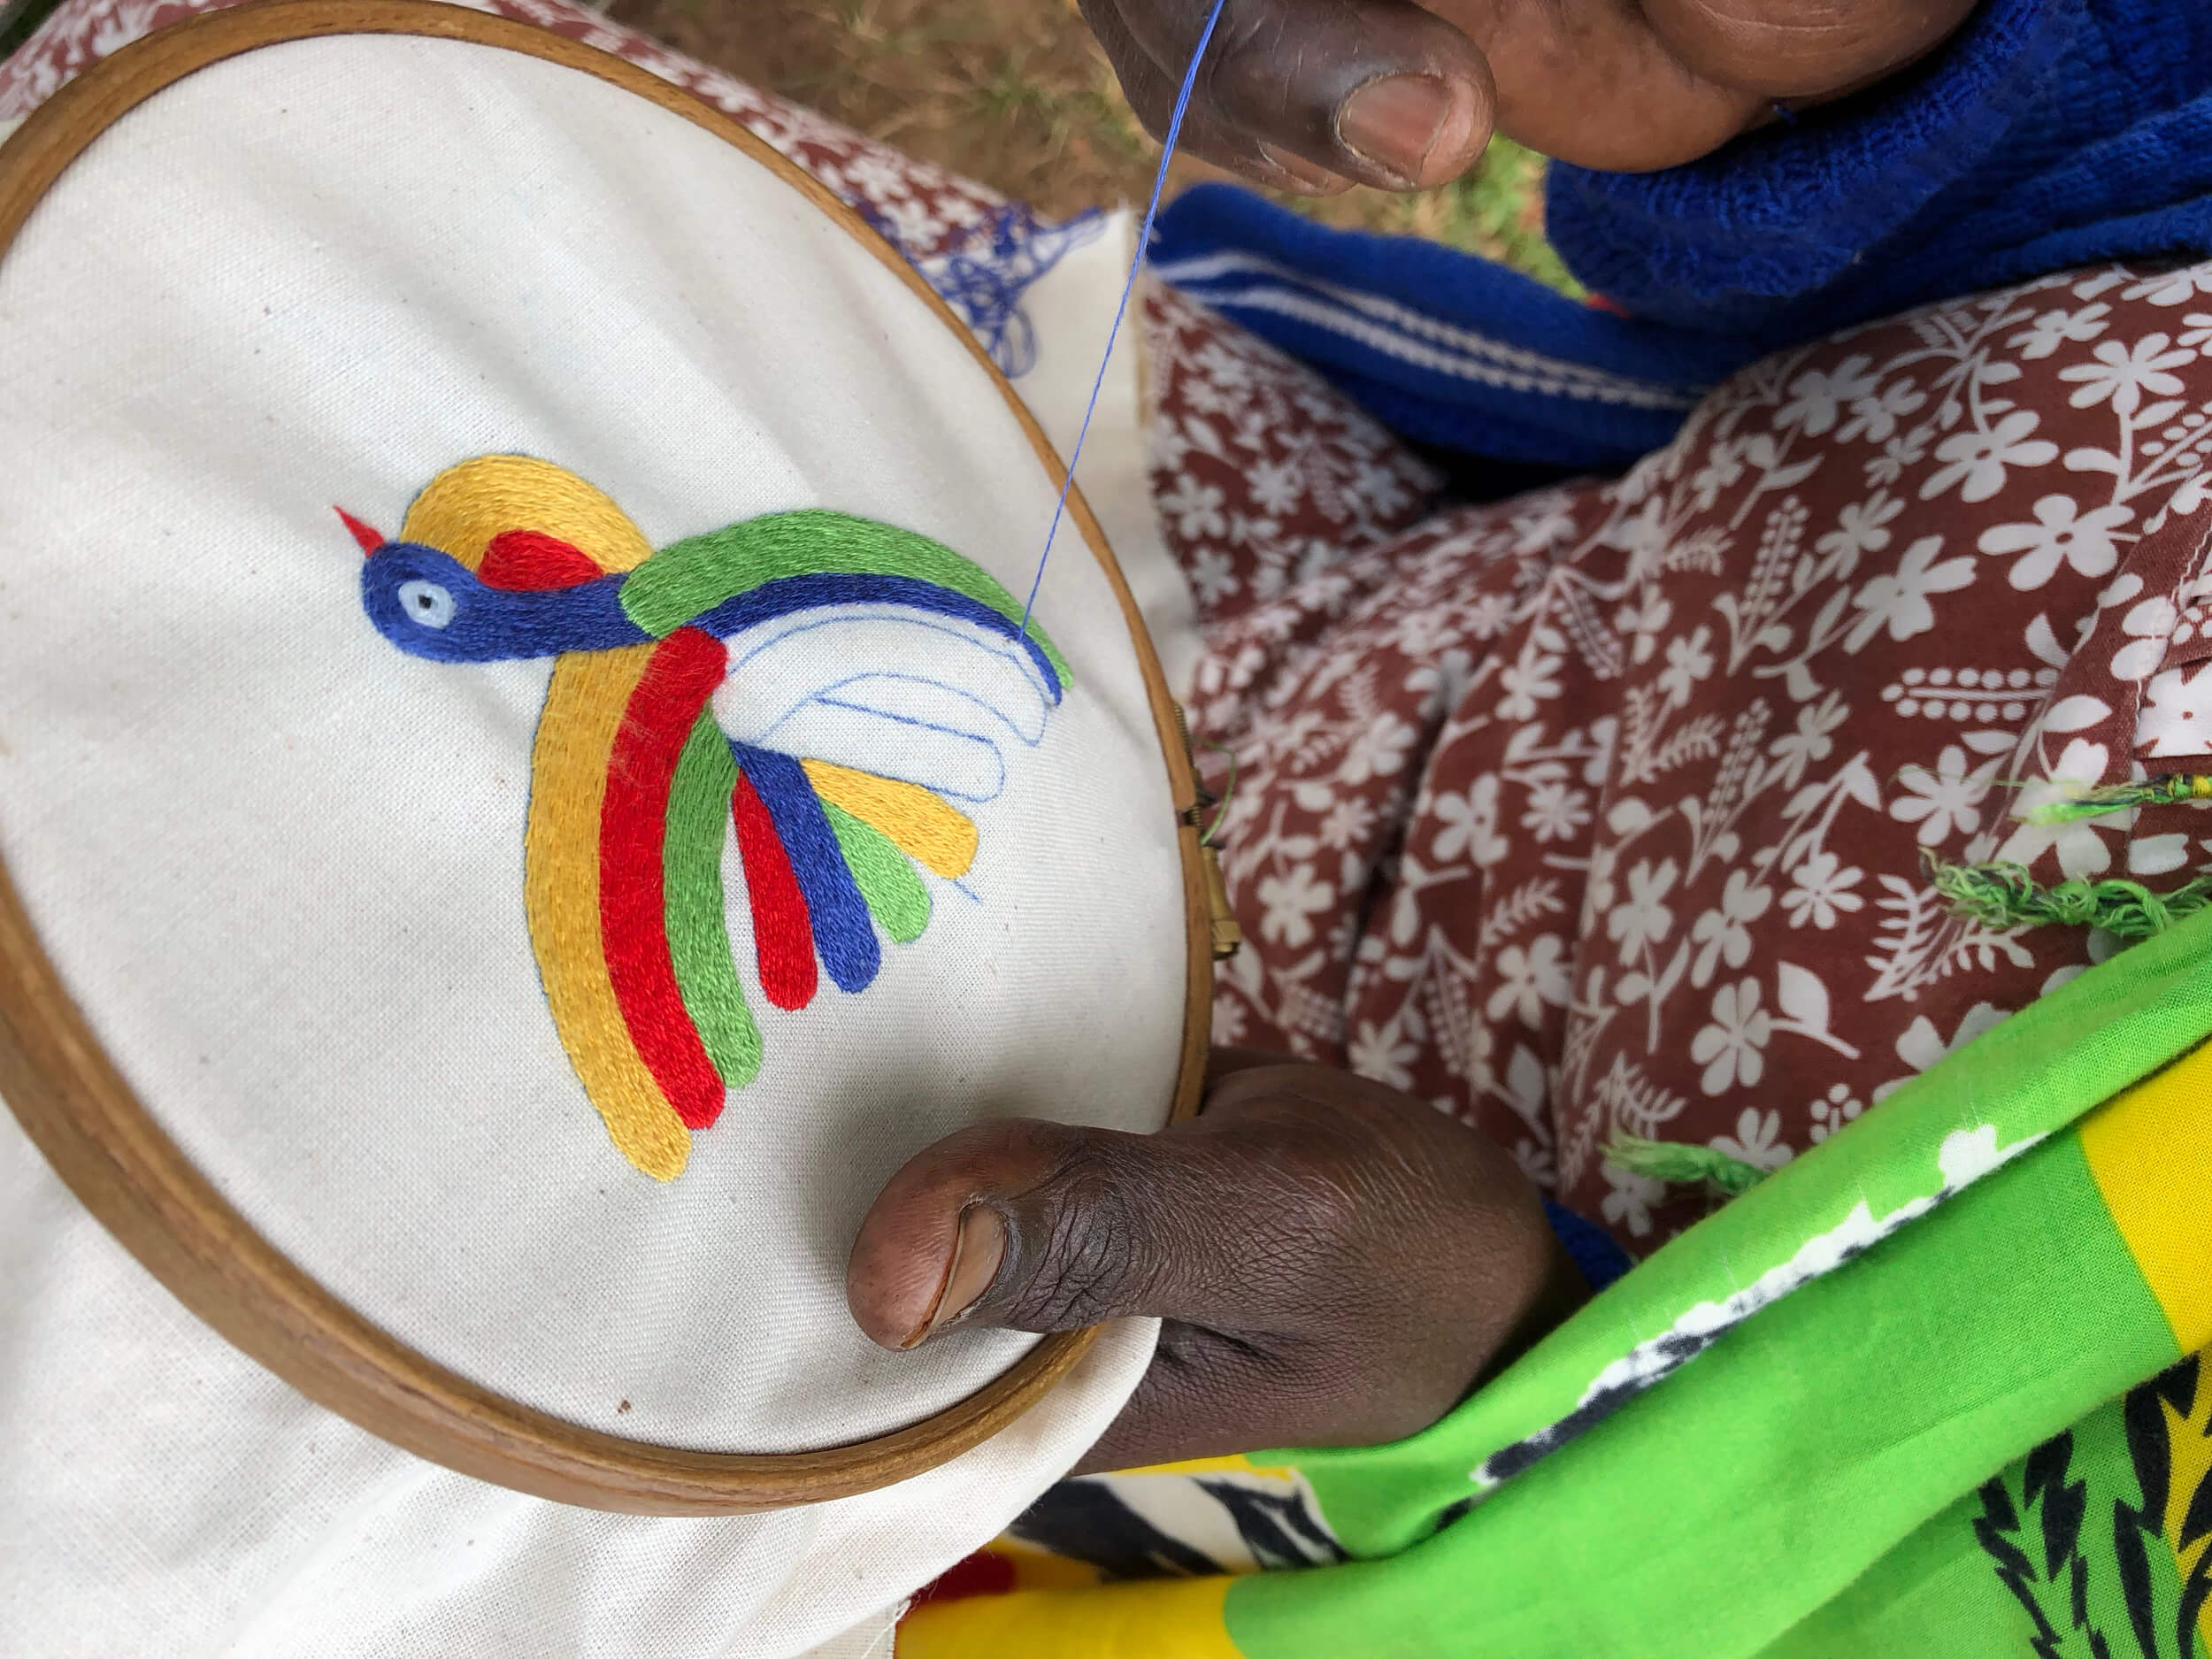 A close-up of a sample hand-embroidered gift of the Peace by Piece International logo